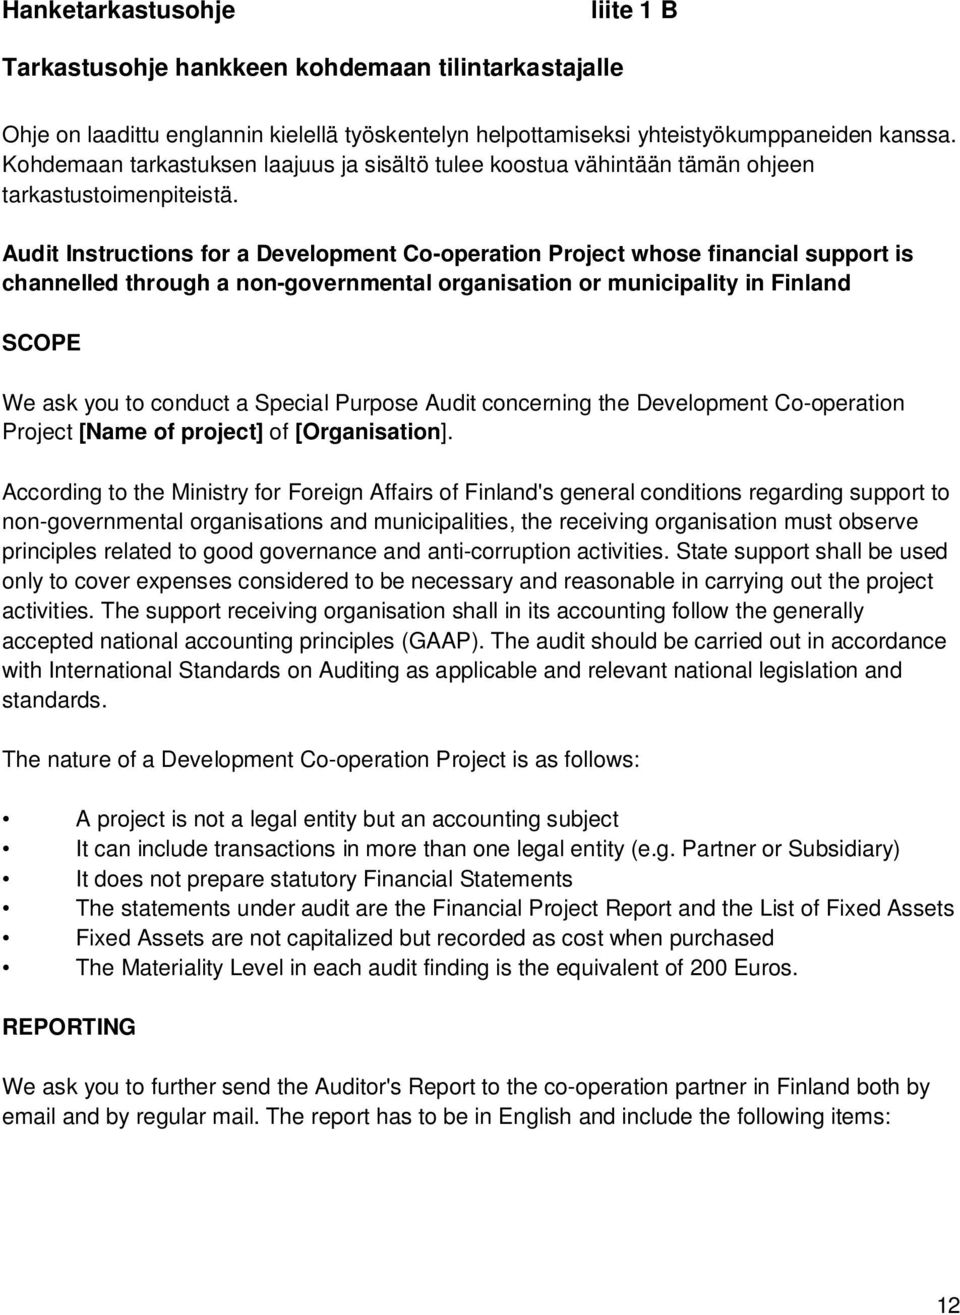 Audit Instructions for a Development Co-operation Project whose financial support is channelled through a non-governmental organisation or municipality in Finland SCOPE We ask you to conduct a